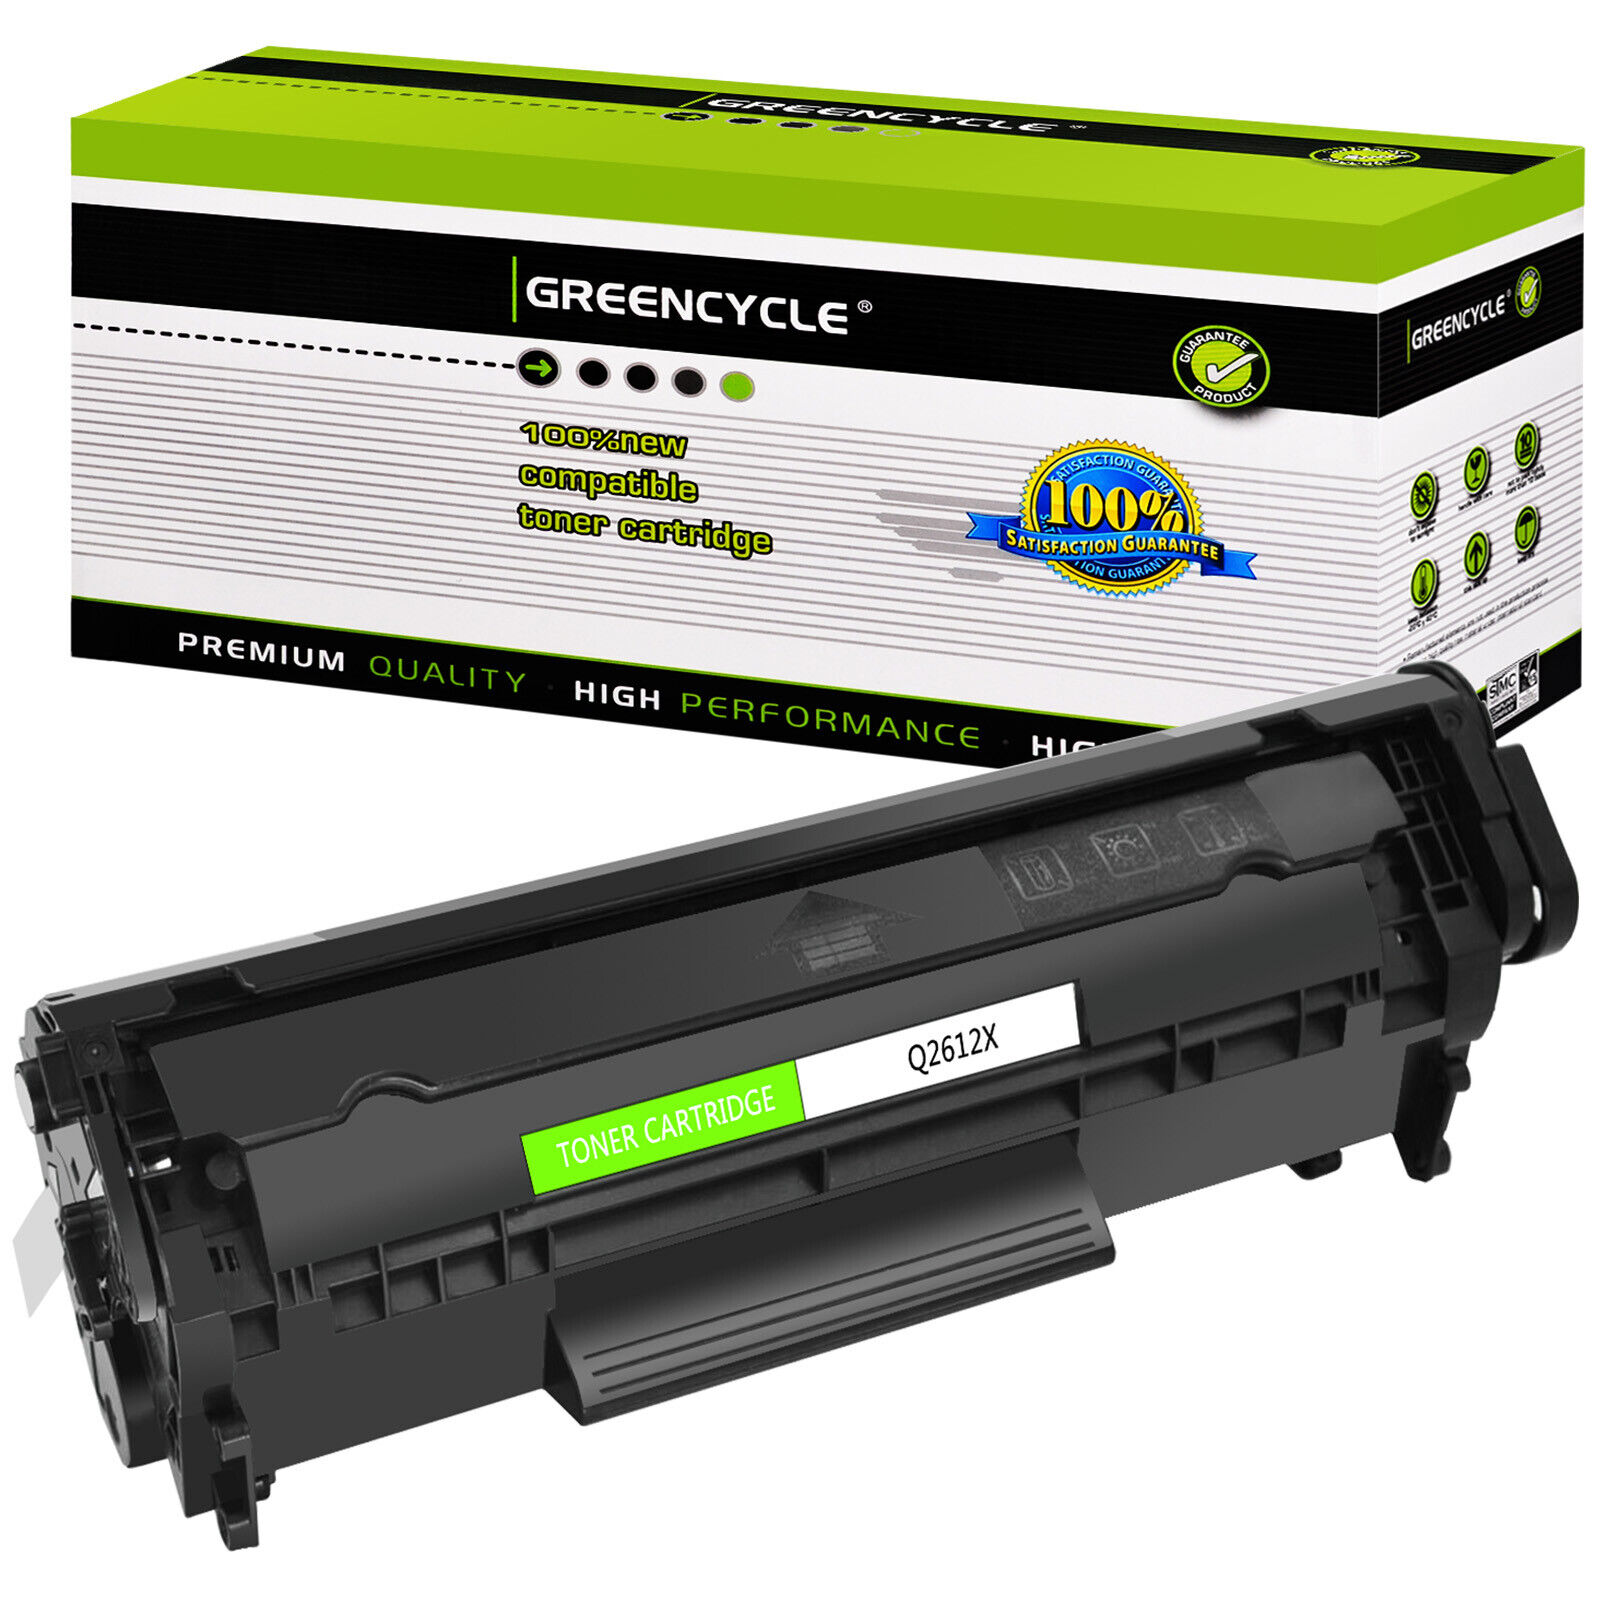 GREENCYCLE Q2612X Toner Lot Fits For HP LaserJet 1022 1022N 1022nw M1005MFP 3050